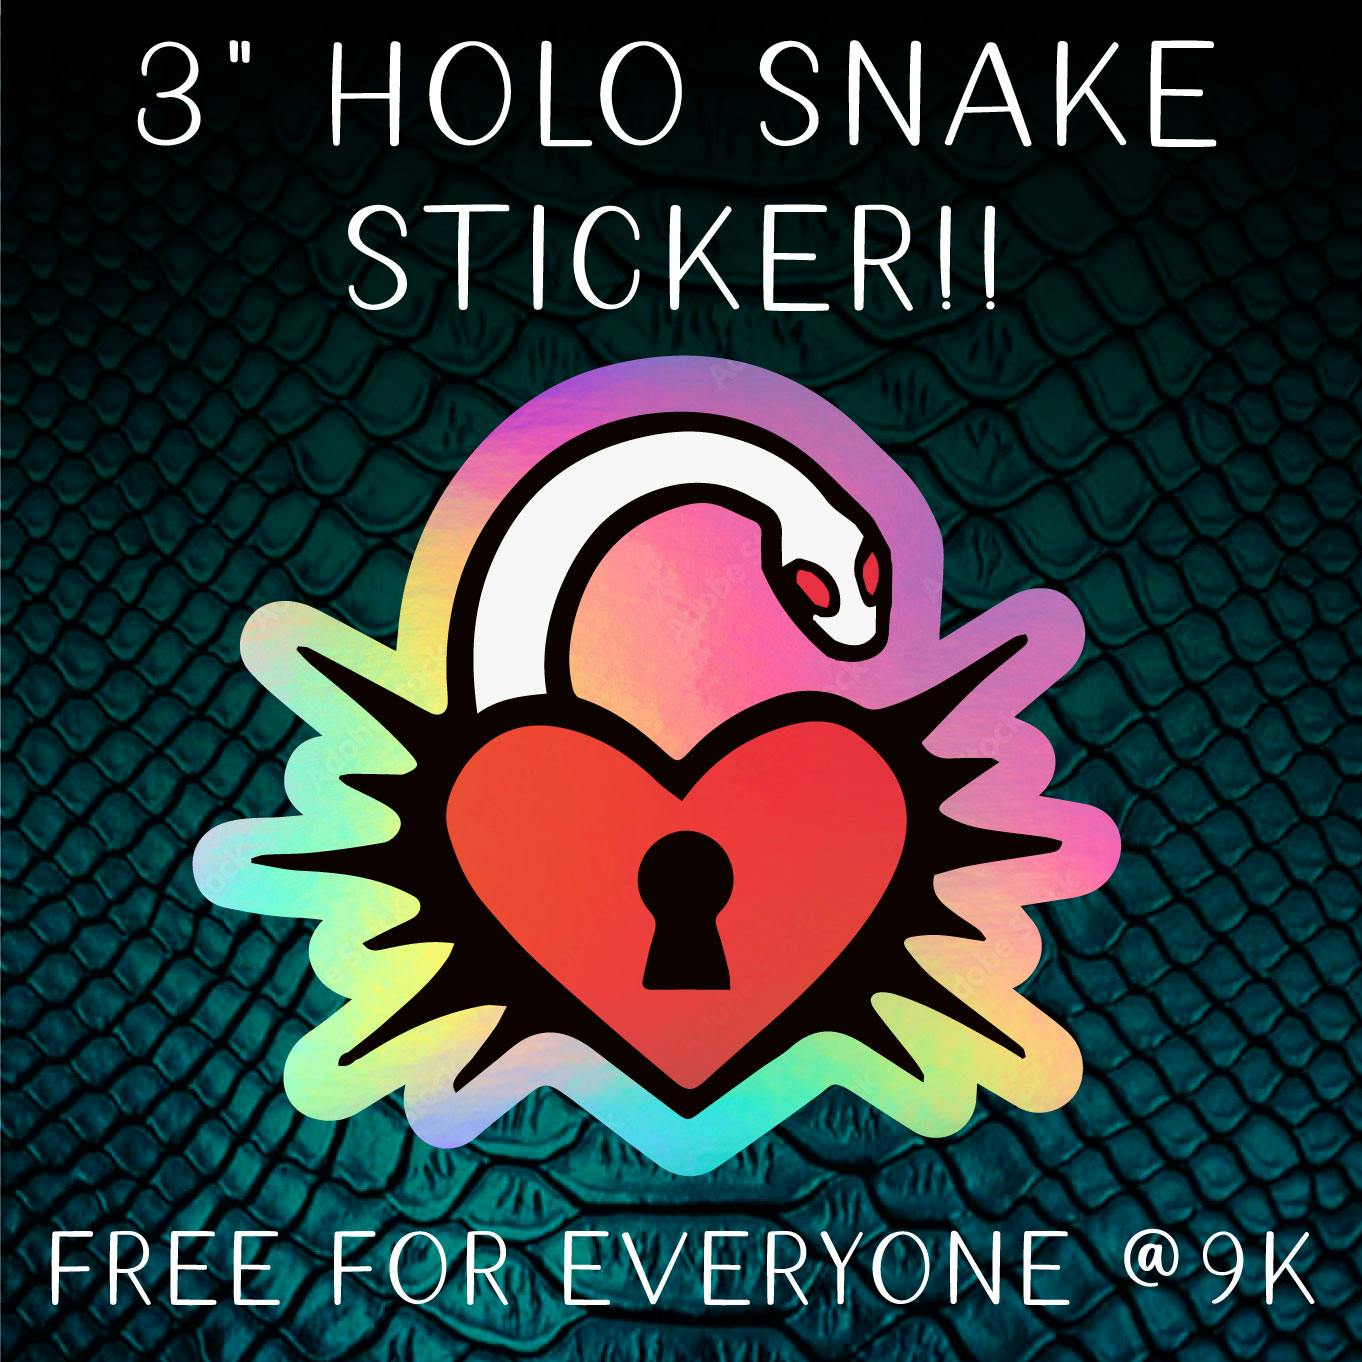 Reach 9k funding, free snake holo sticker for everyone!